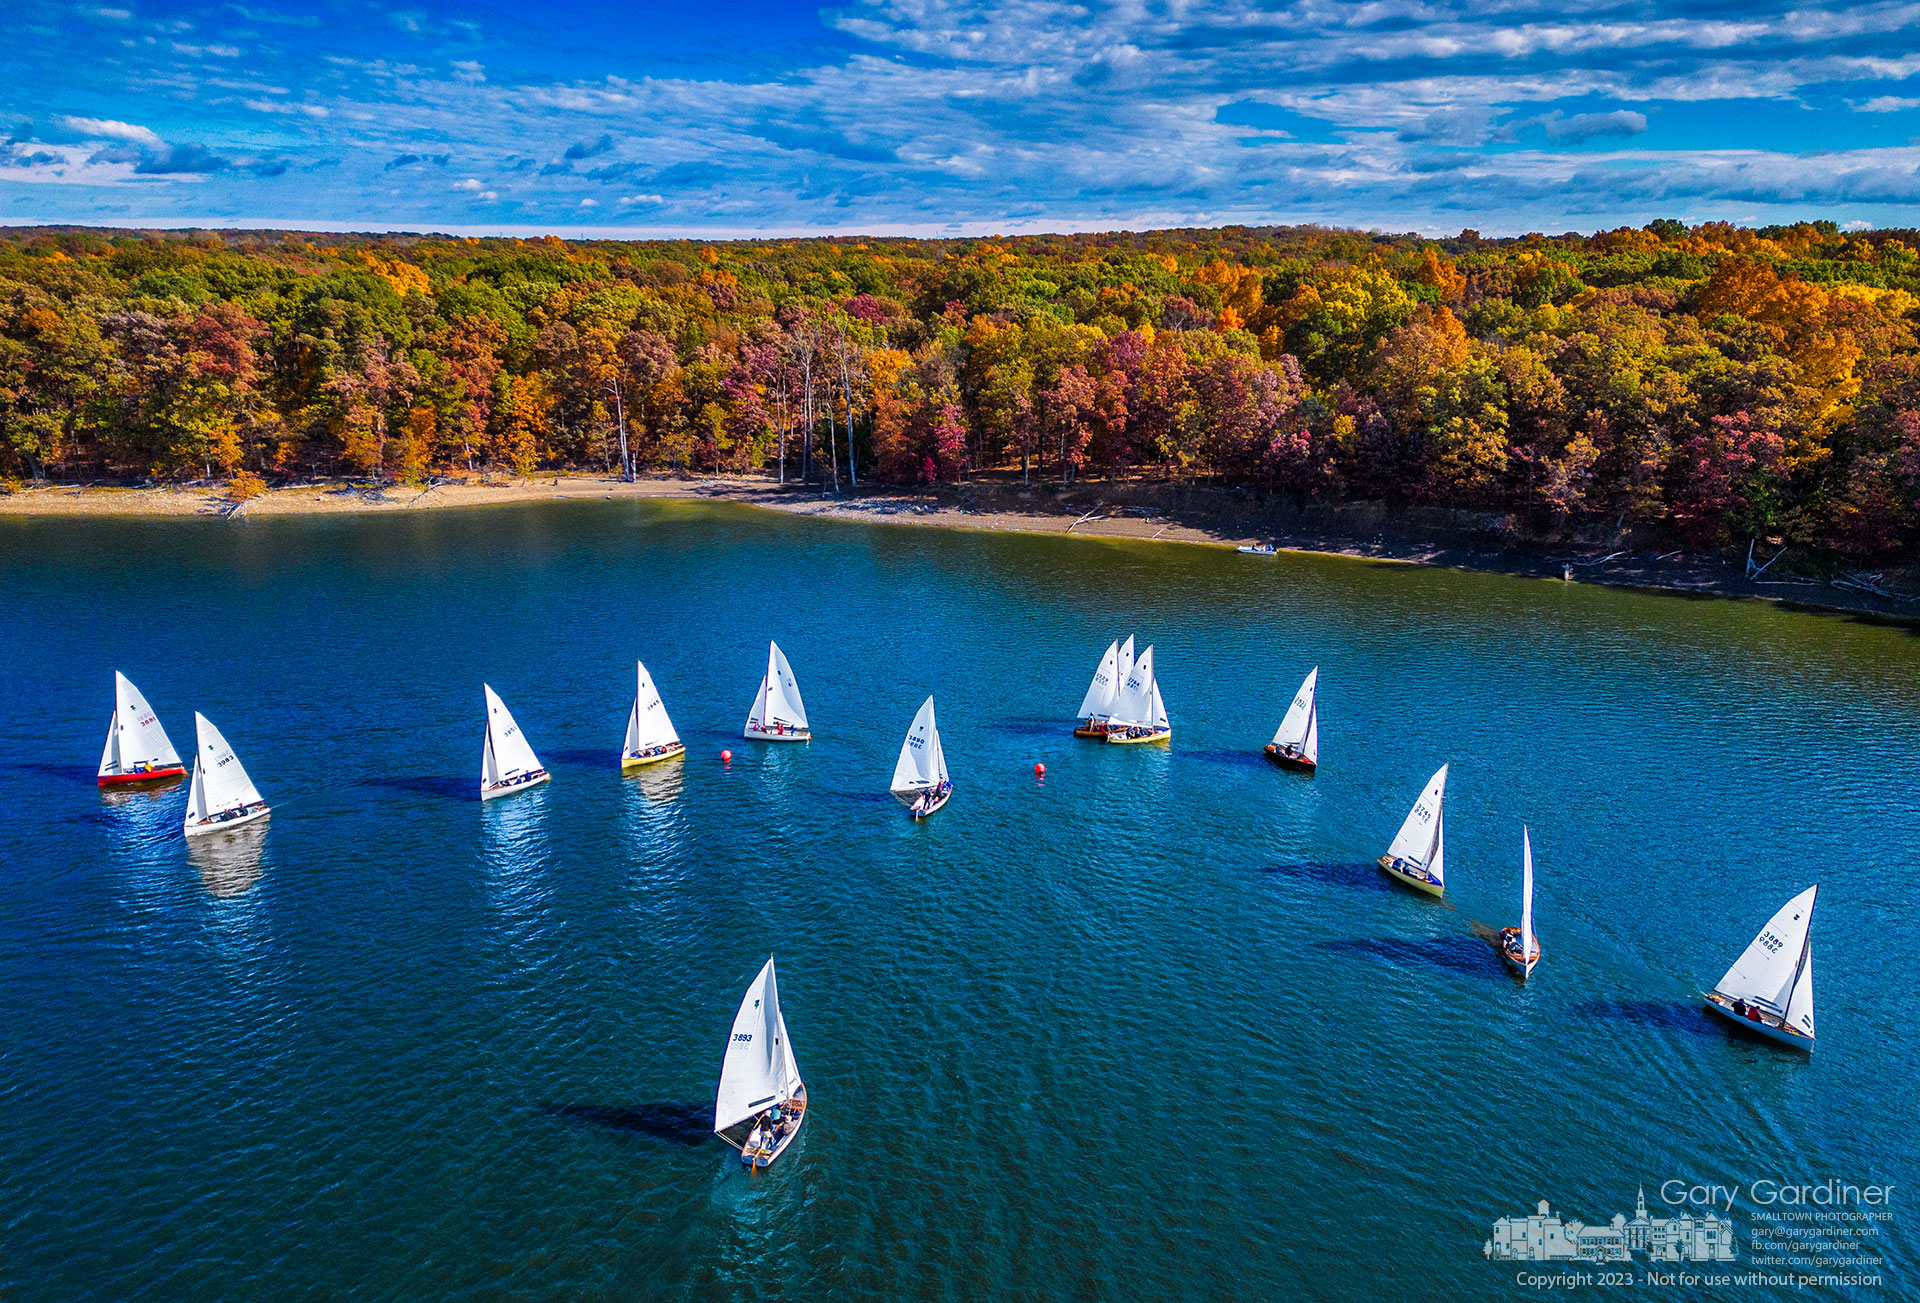 Sailboats turn into the wind around the downwind buoys in an afternoon race at Hoover Sailing Club on Hoover Reservoir. My Final Photo for October 21, 2023.